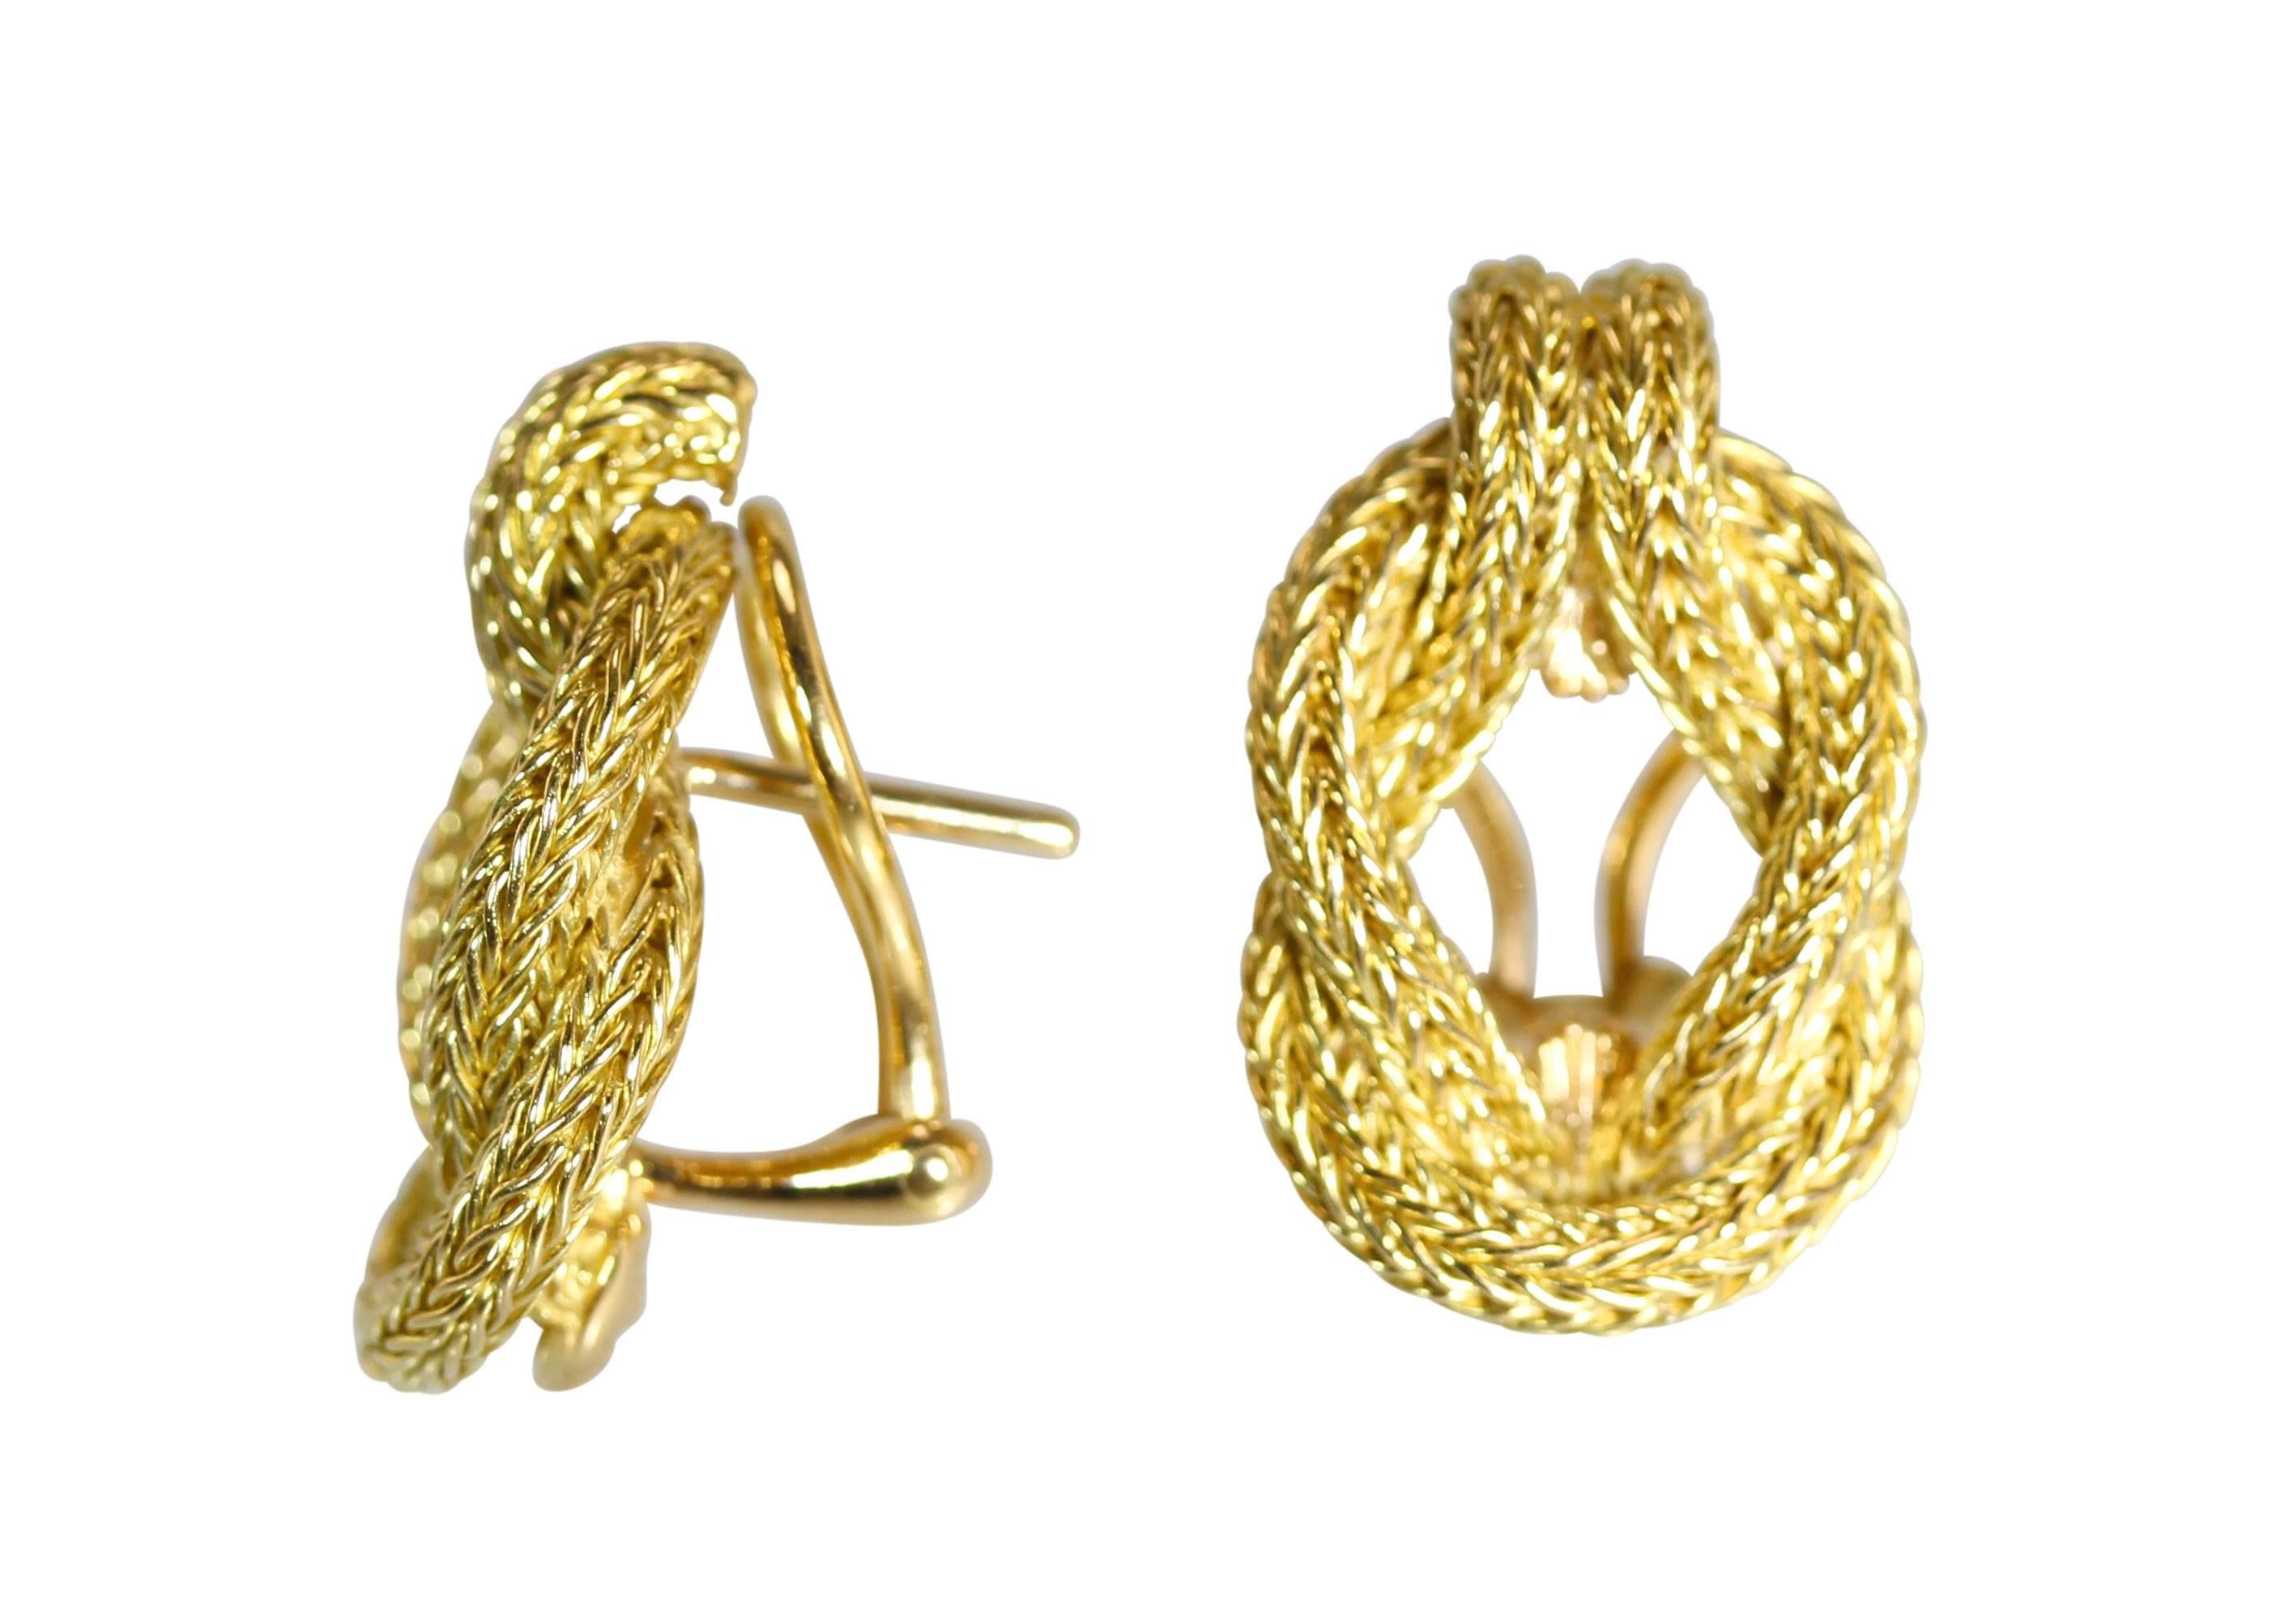 A pair of 18 karat gold earclips by Lalaounis, Greece, designed as the Hercules knots of gold rope, measuring 1 by 5/8 inch, gross weight 17.5 grams, stamped 750, GR A21, with makers mark for Lalaounis.